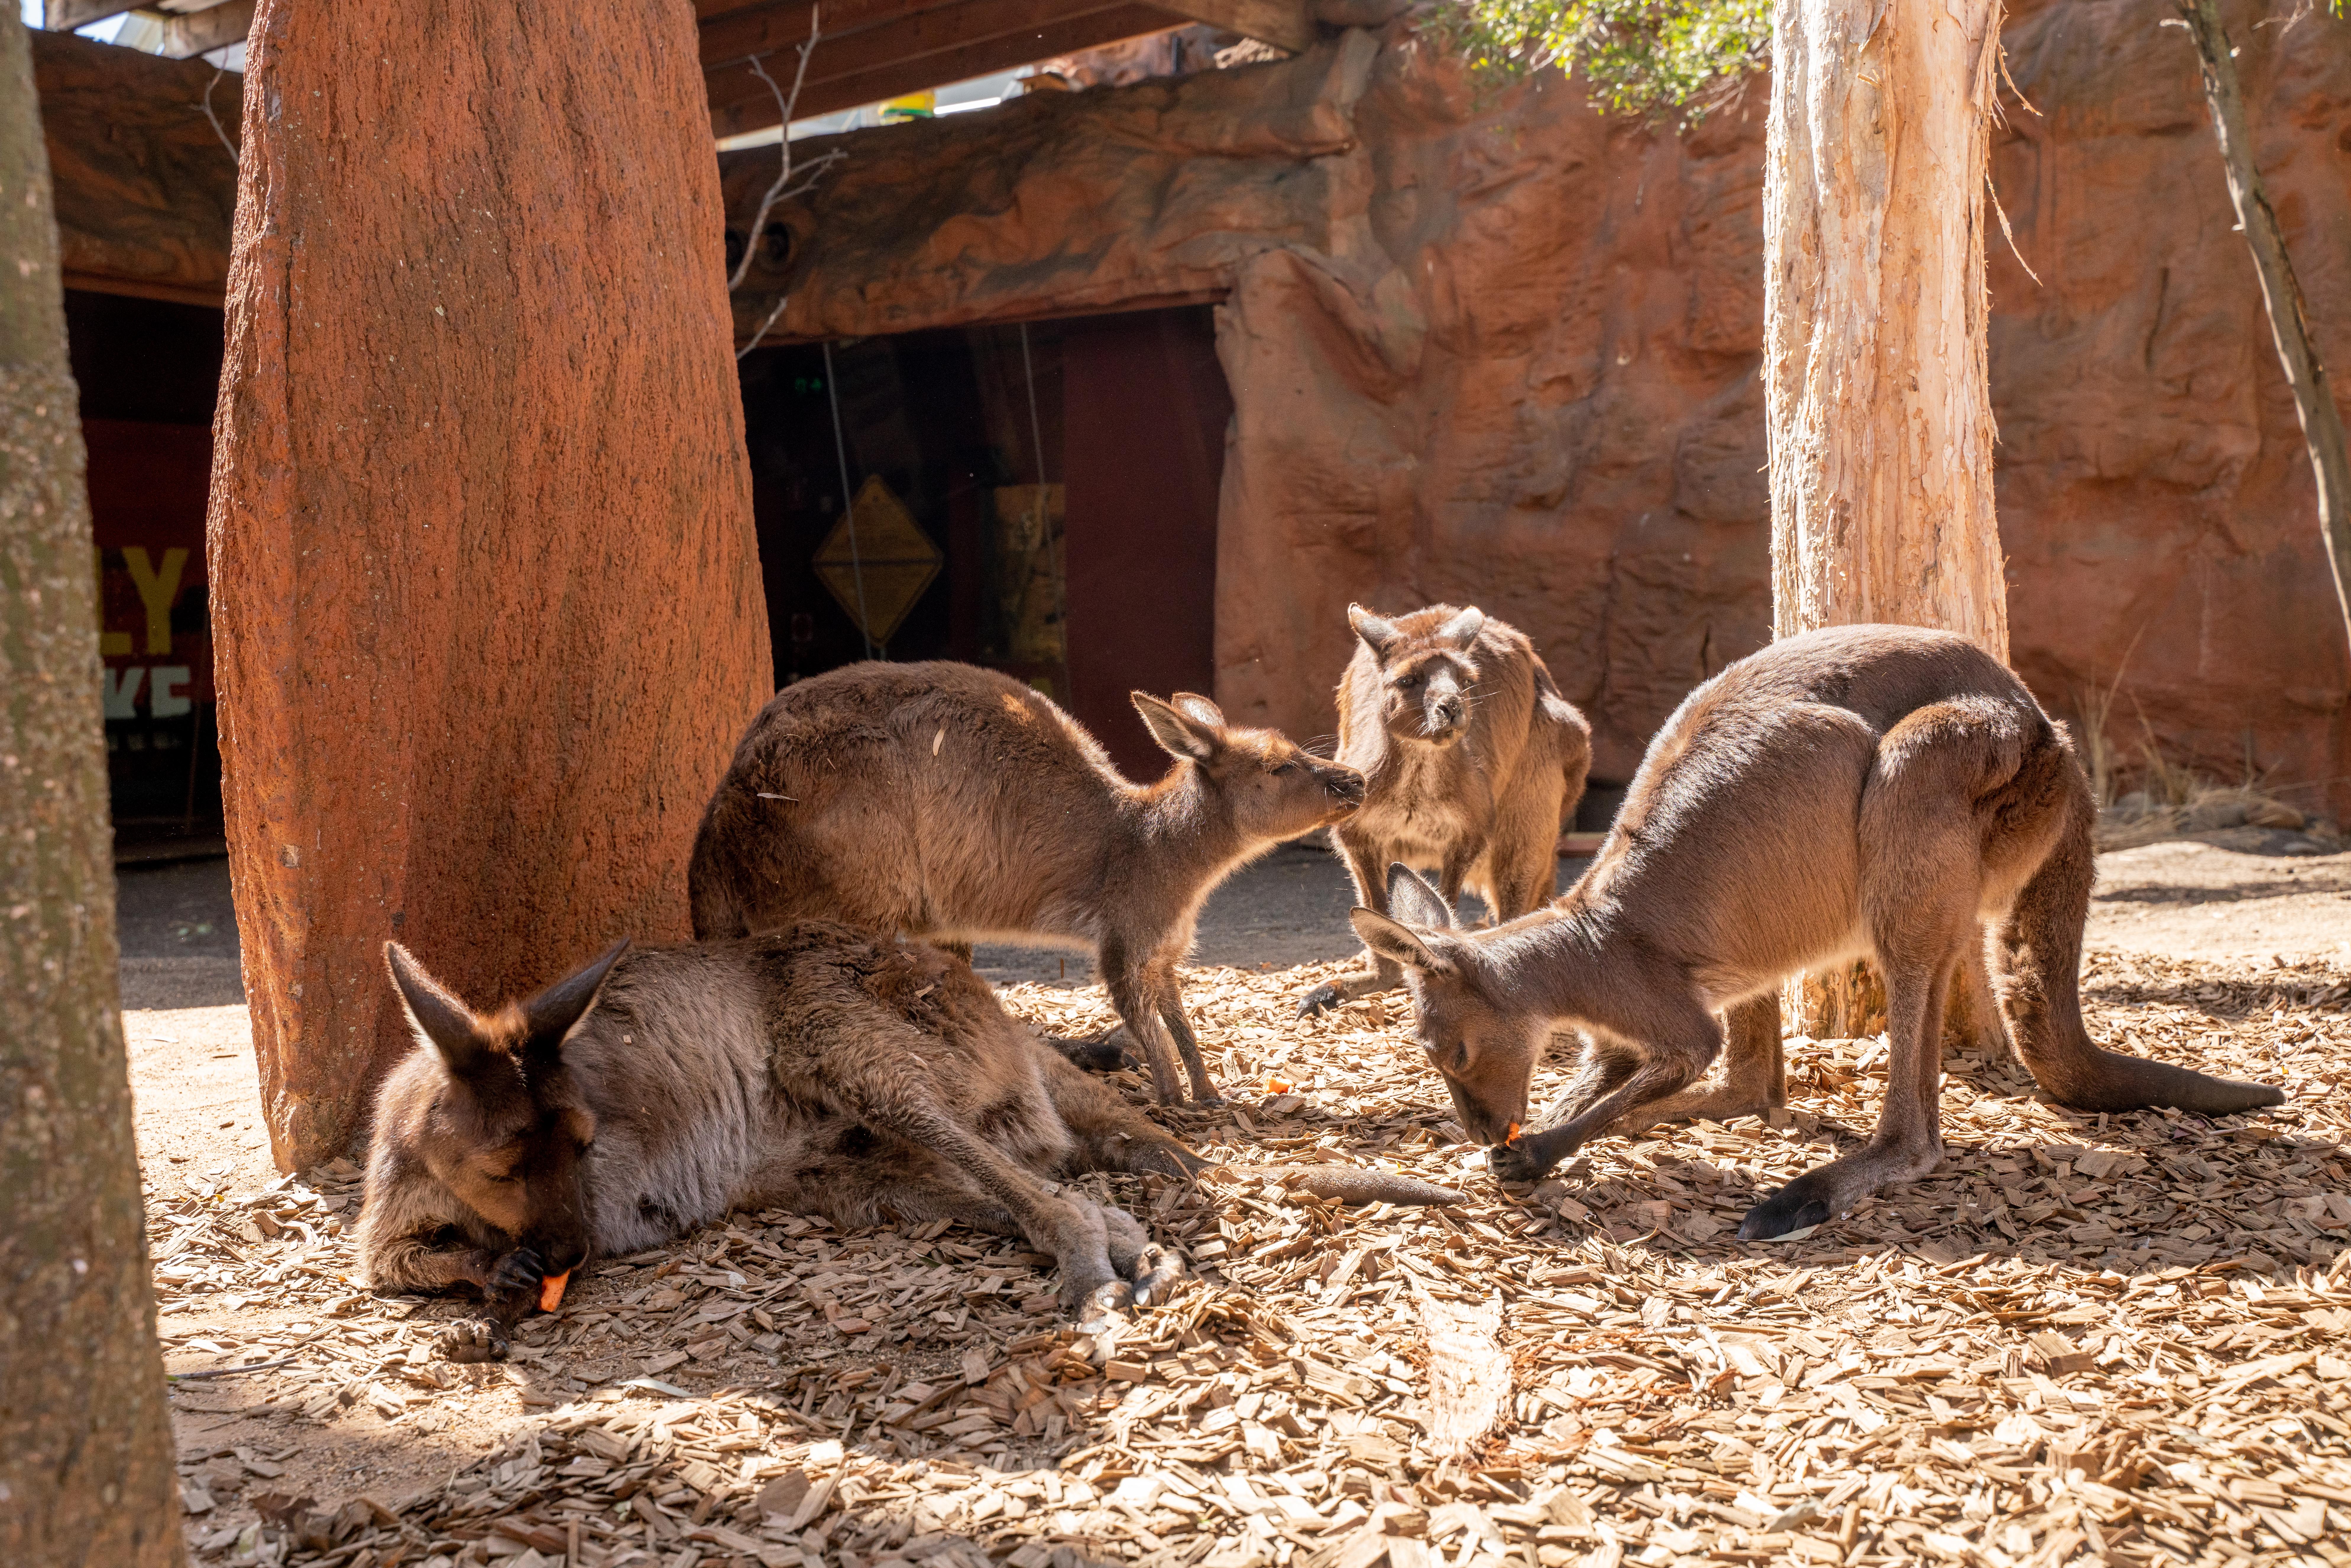 Places to visit in Sydney with Kids - Wildlife Sydney Zoo’